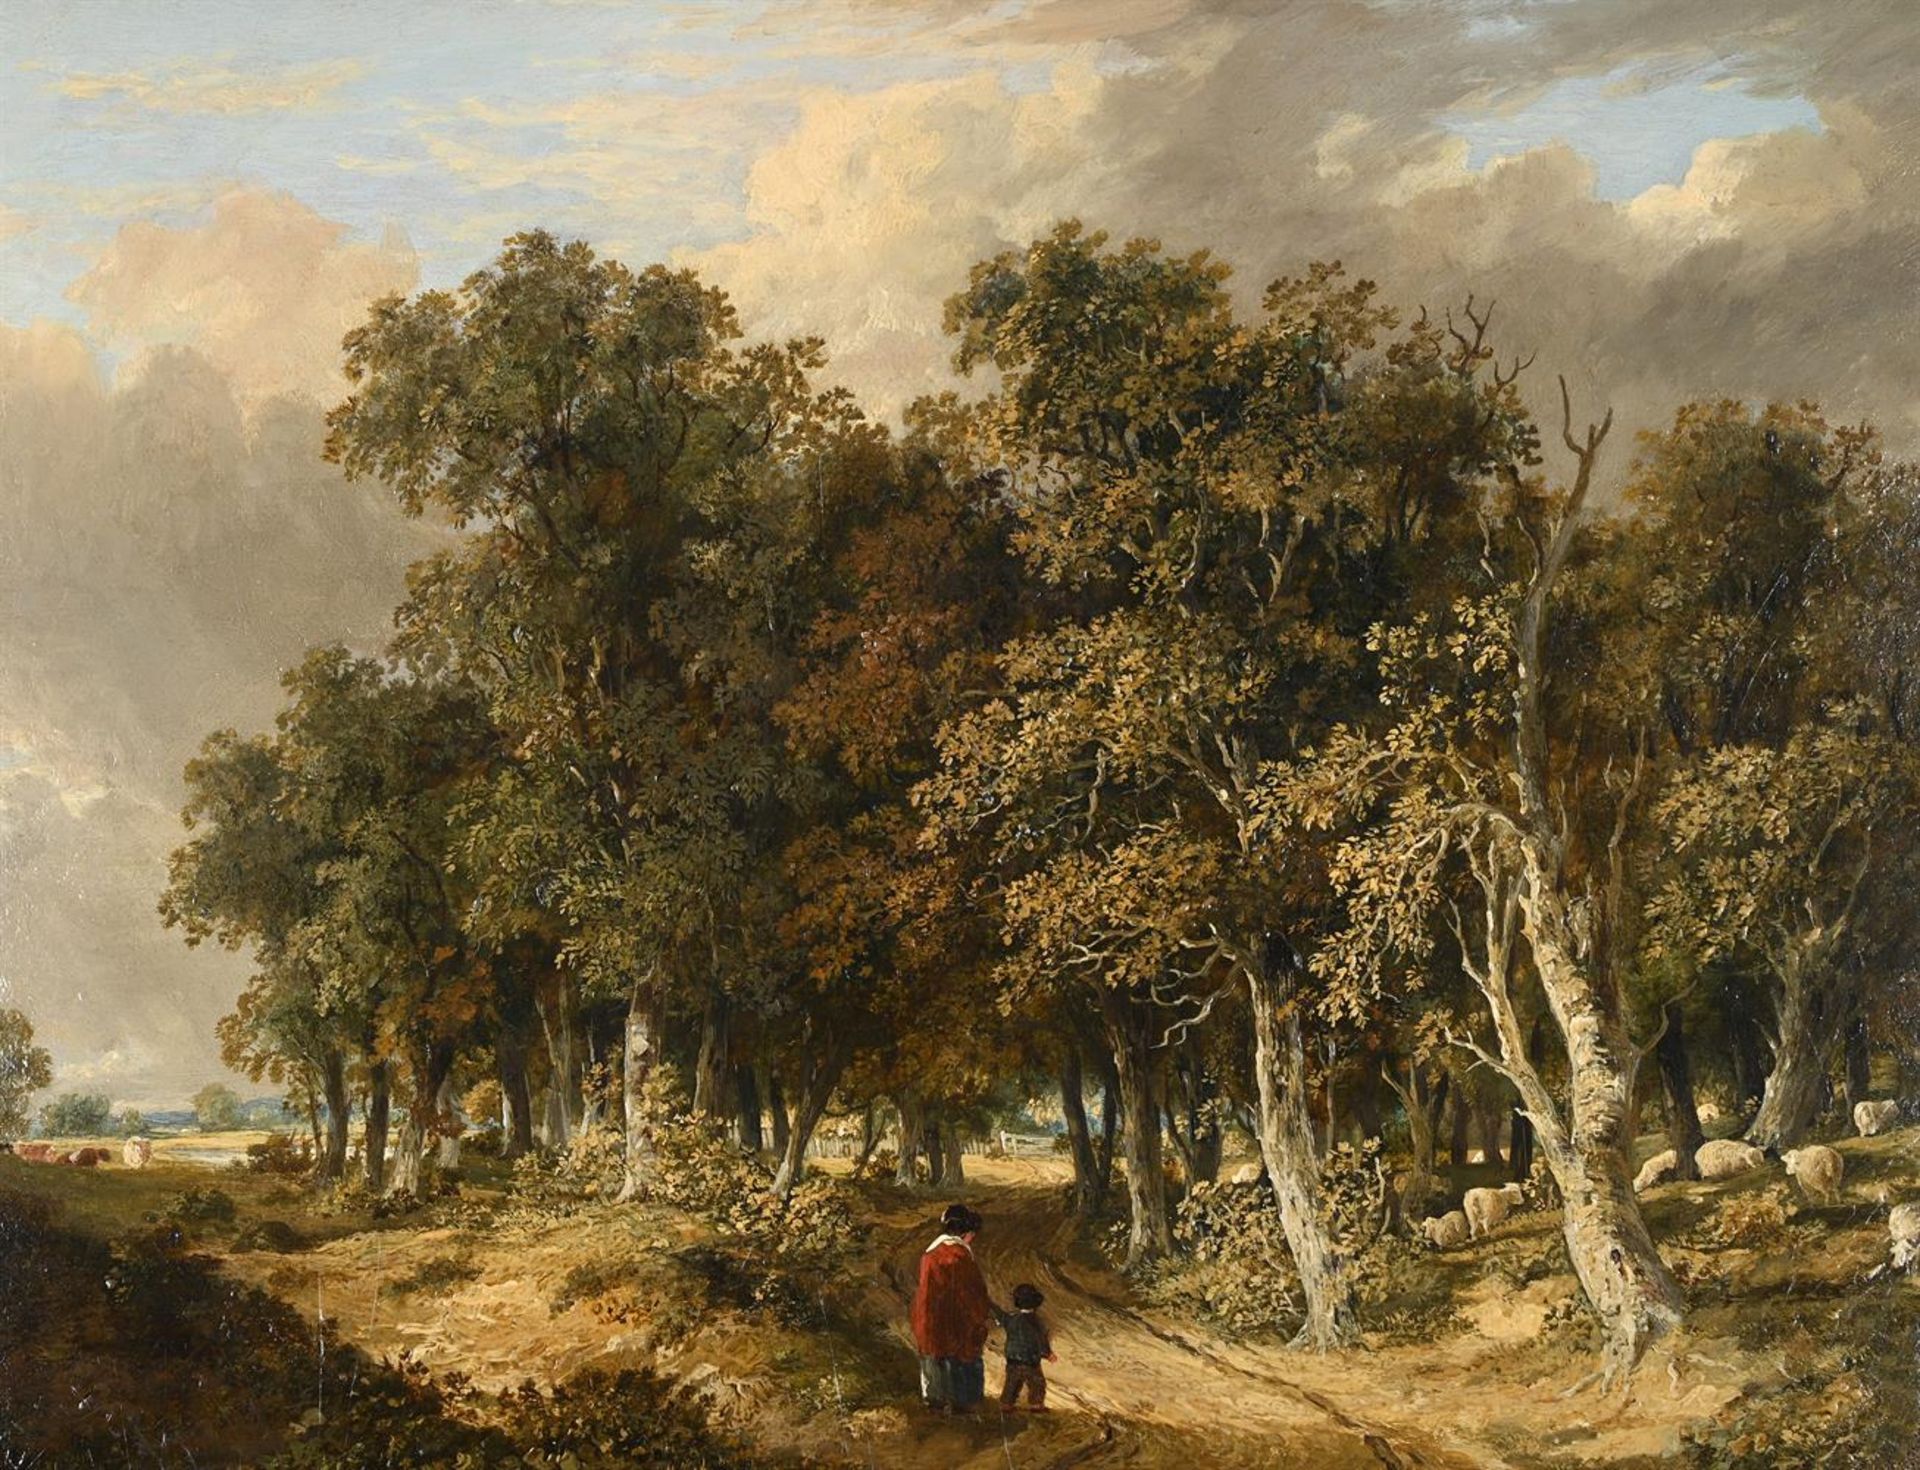 JAMES STARK (BRITISH 1794-1859), WOODED LANDSCAPE WITH A MOTHER AND CHILD ON A TRACK